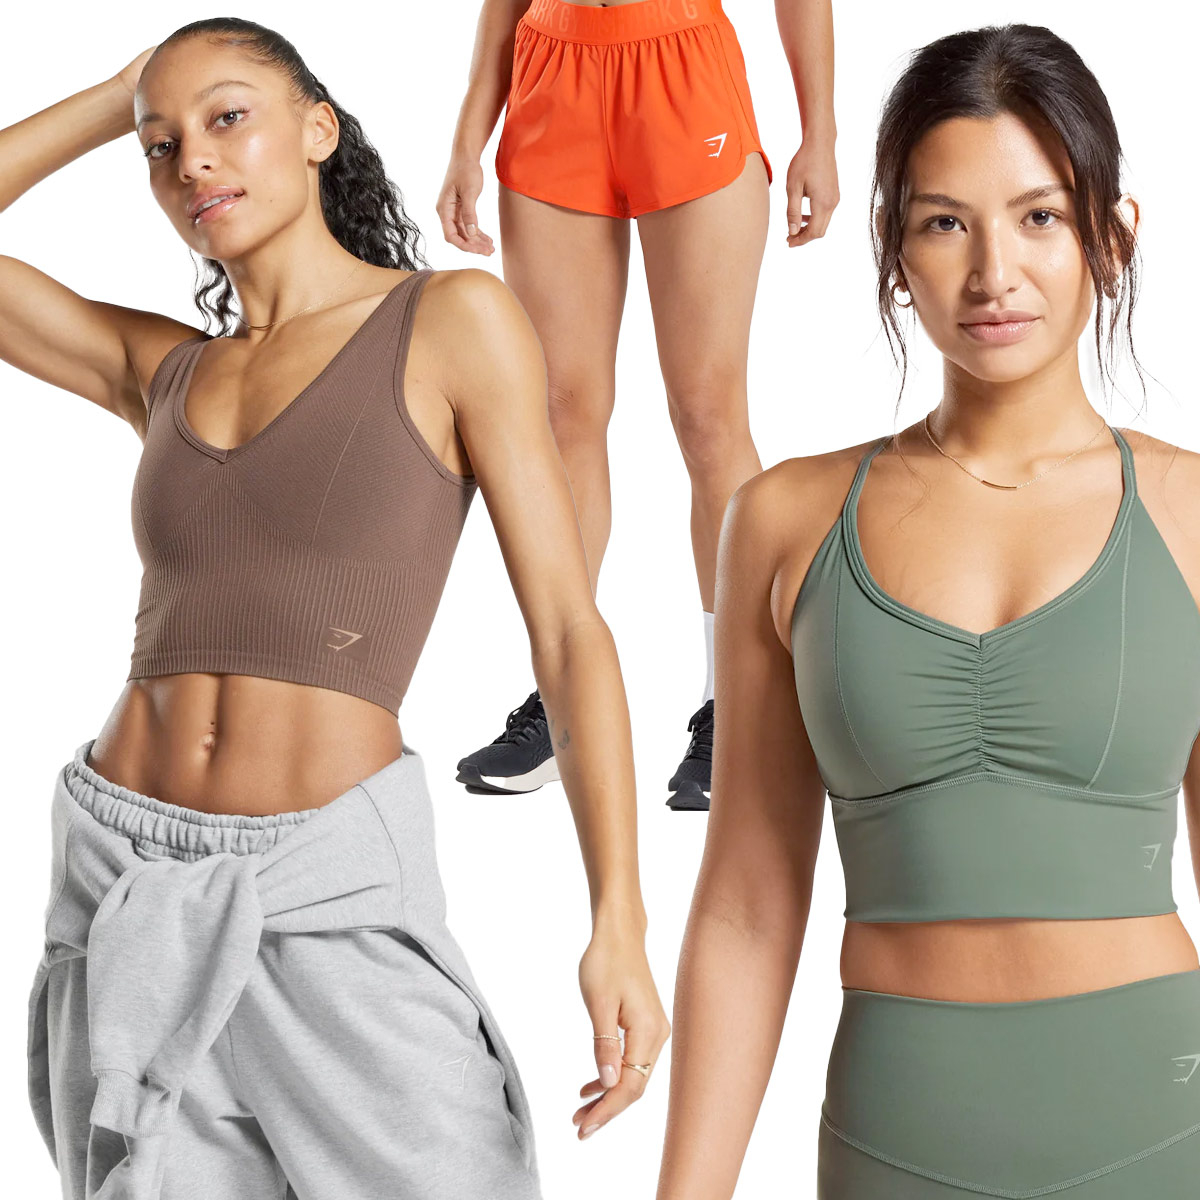 Shop Gymshark's 60% Off Sale for Stylish Sports Bras, Running Shorts &  Leggings for as Low as $14